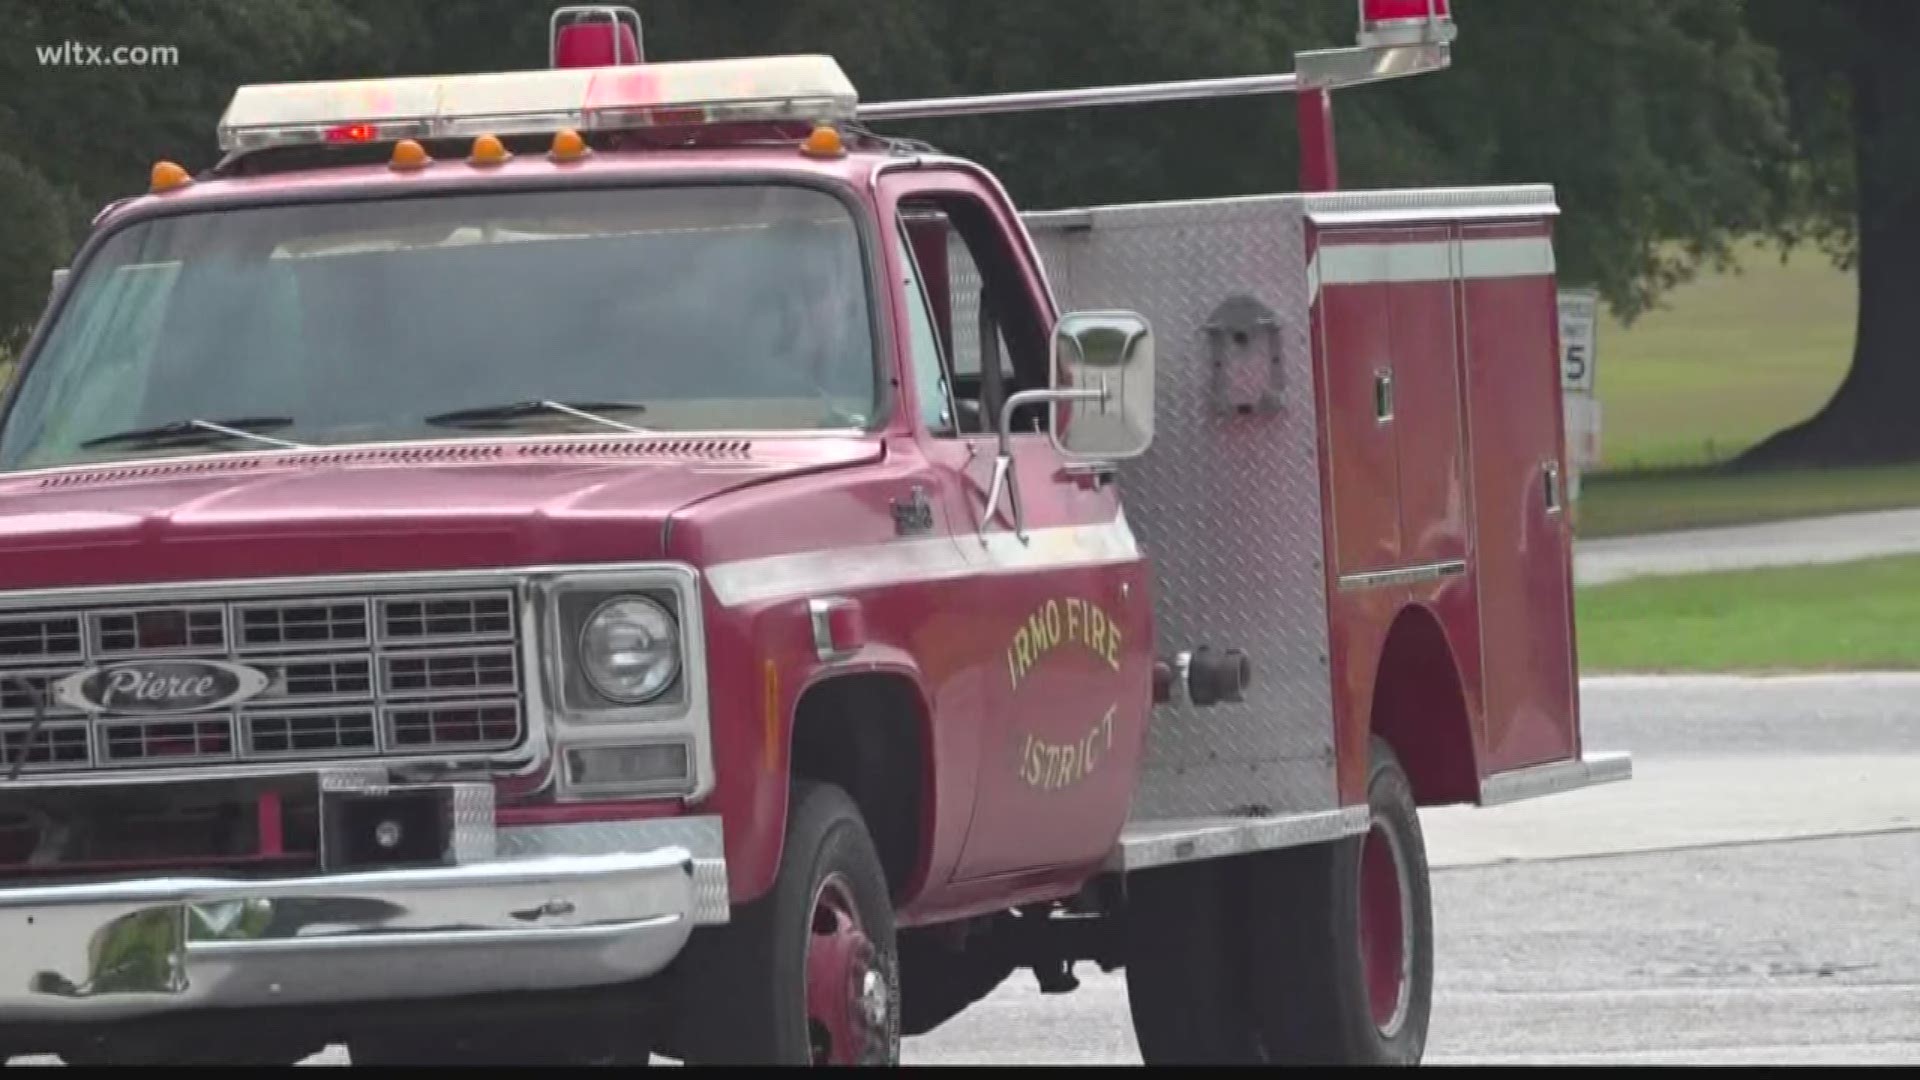 The 1979 Chevy truck was adopted by the Irmo Fire District in 1990 and, after a long journey, is back home. 'It needed to come back home,' said Chief Sonefeld. More: https://on.wltx.com/2yJErvv